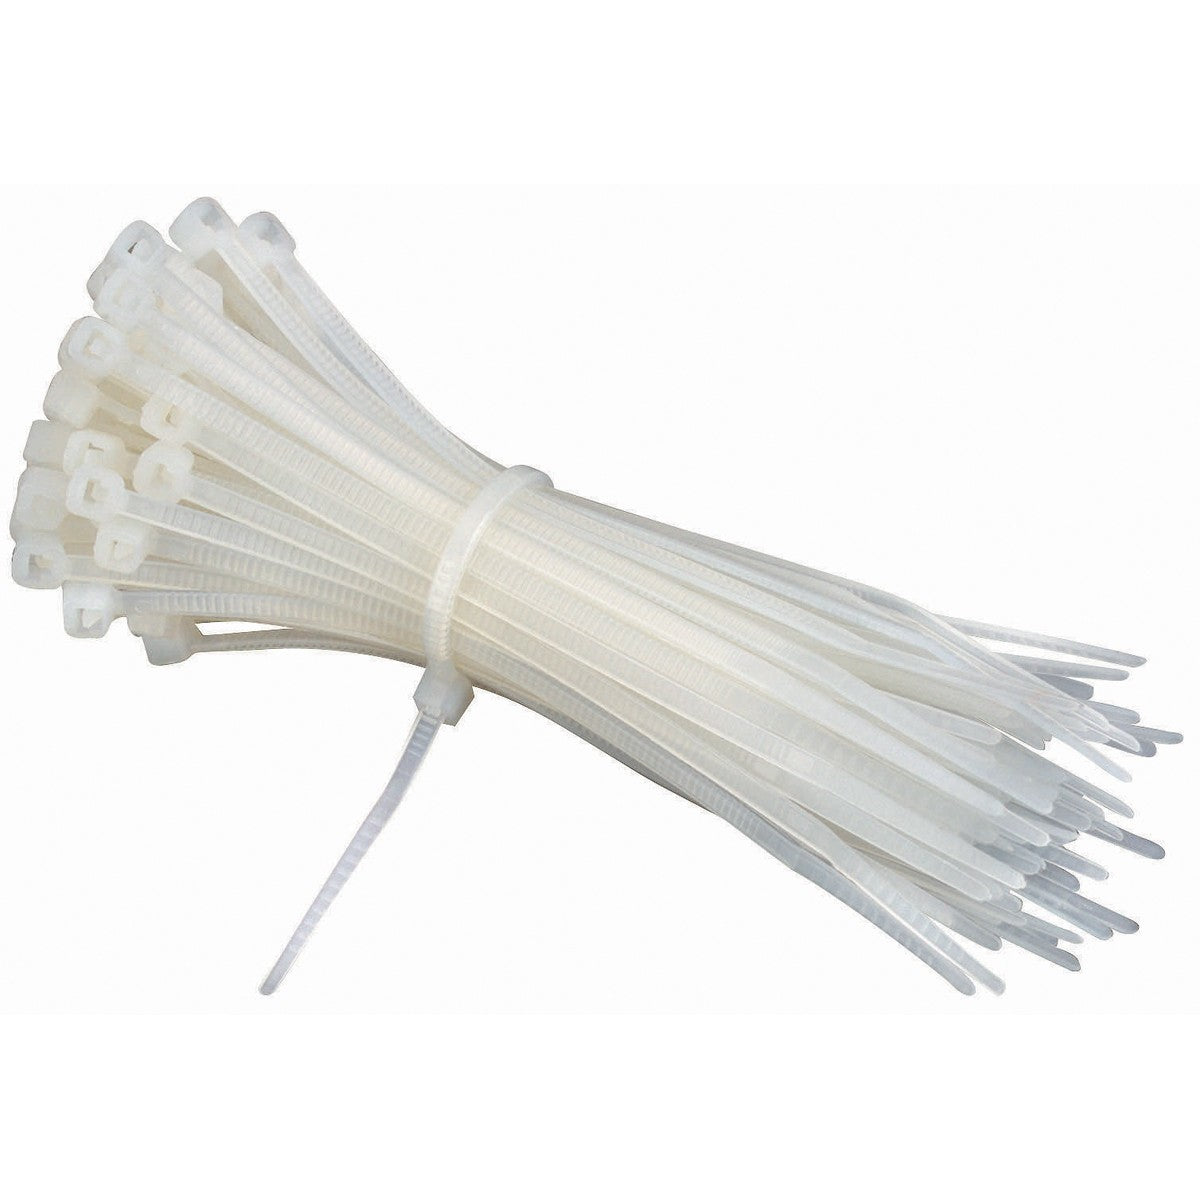 8 x 500mm - The Cable Tie Factory